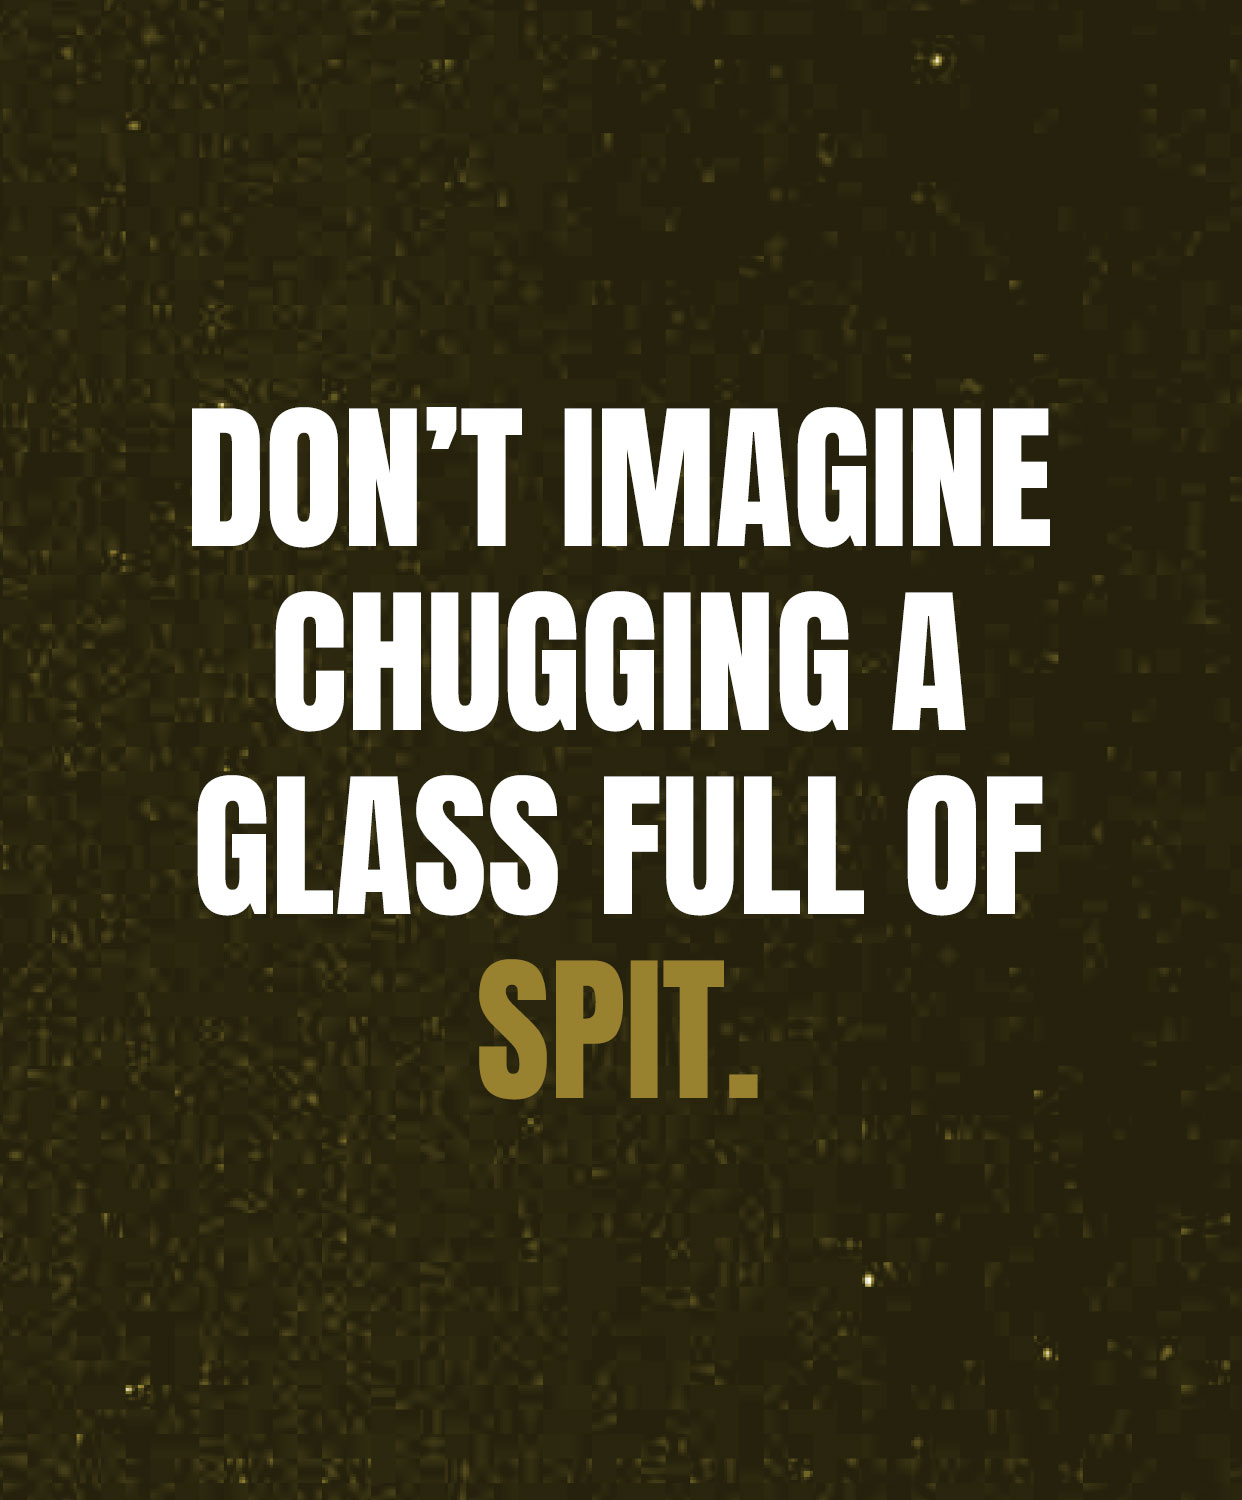 Don't imagine chugging a glass full of spit.